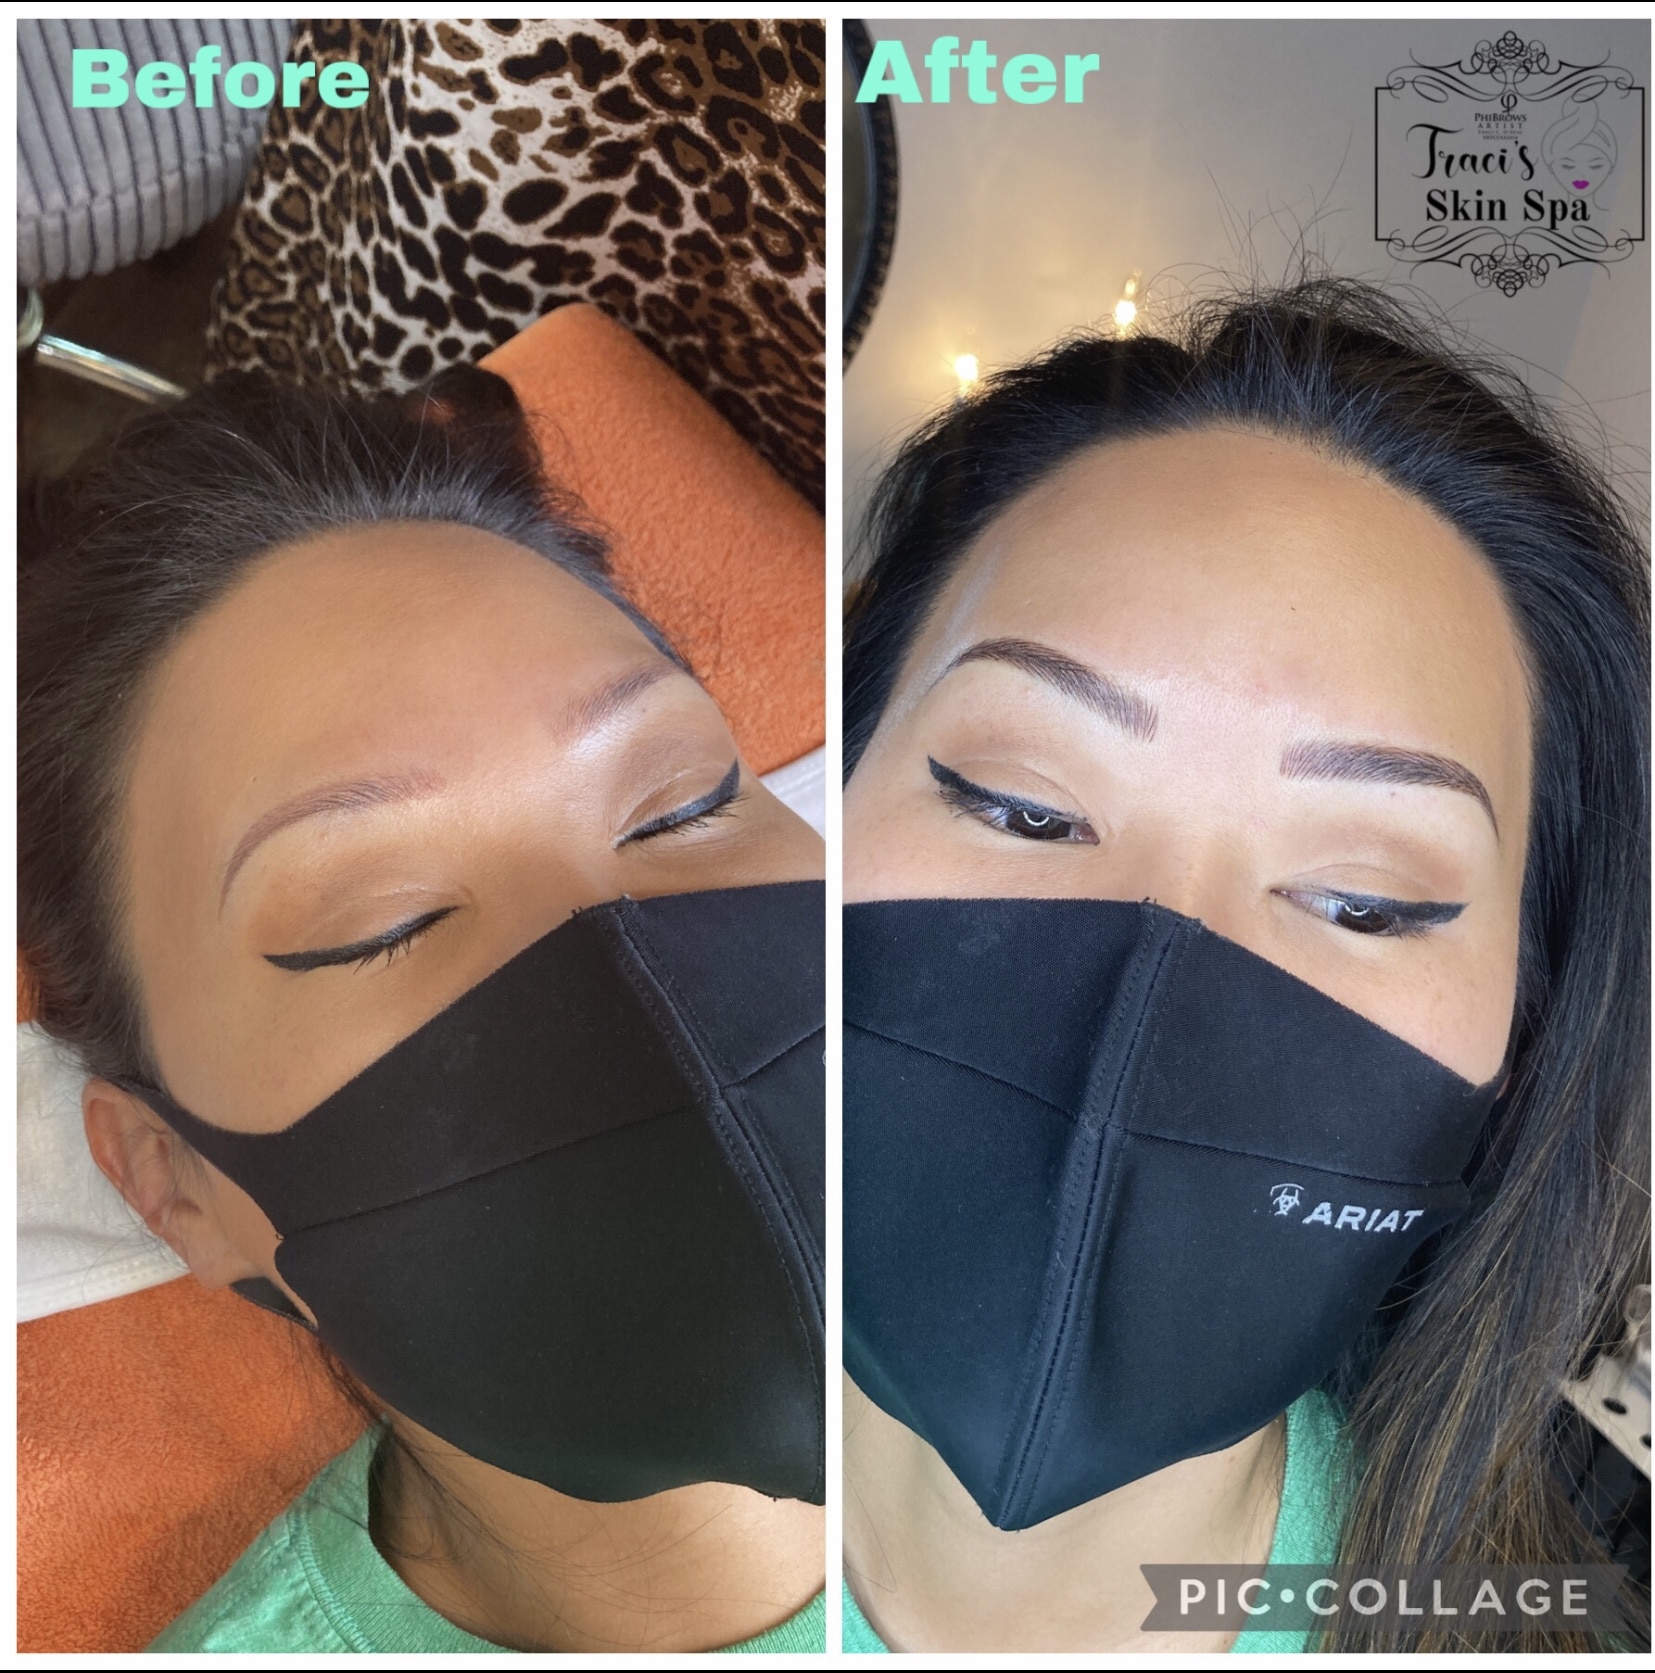 Before and after microblading services in St. Louis.